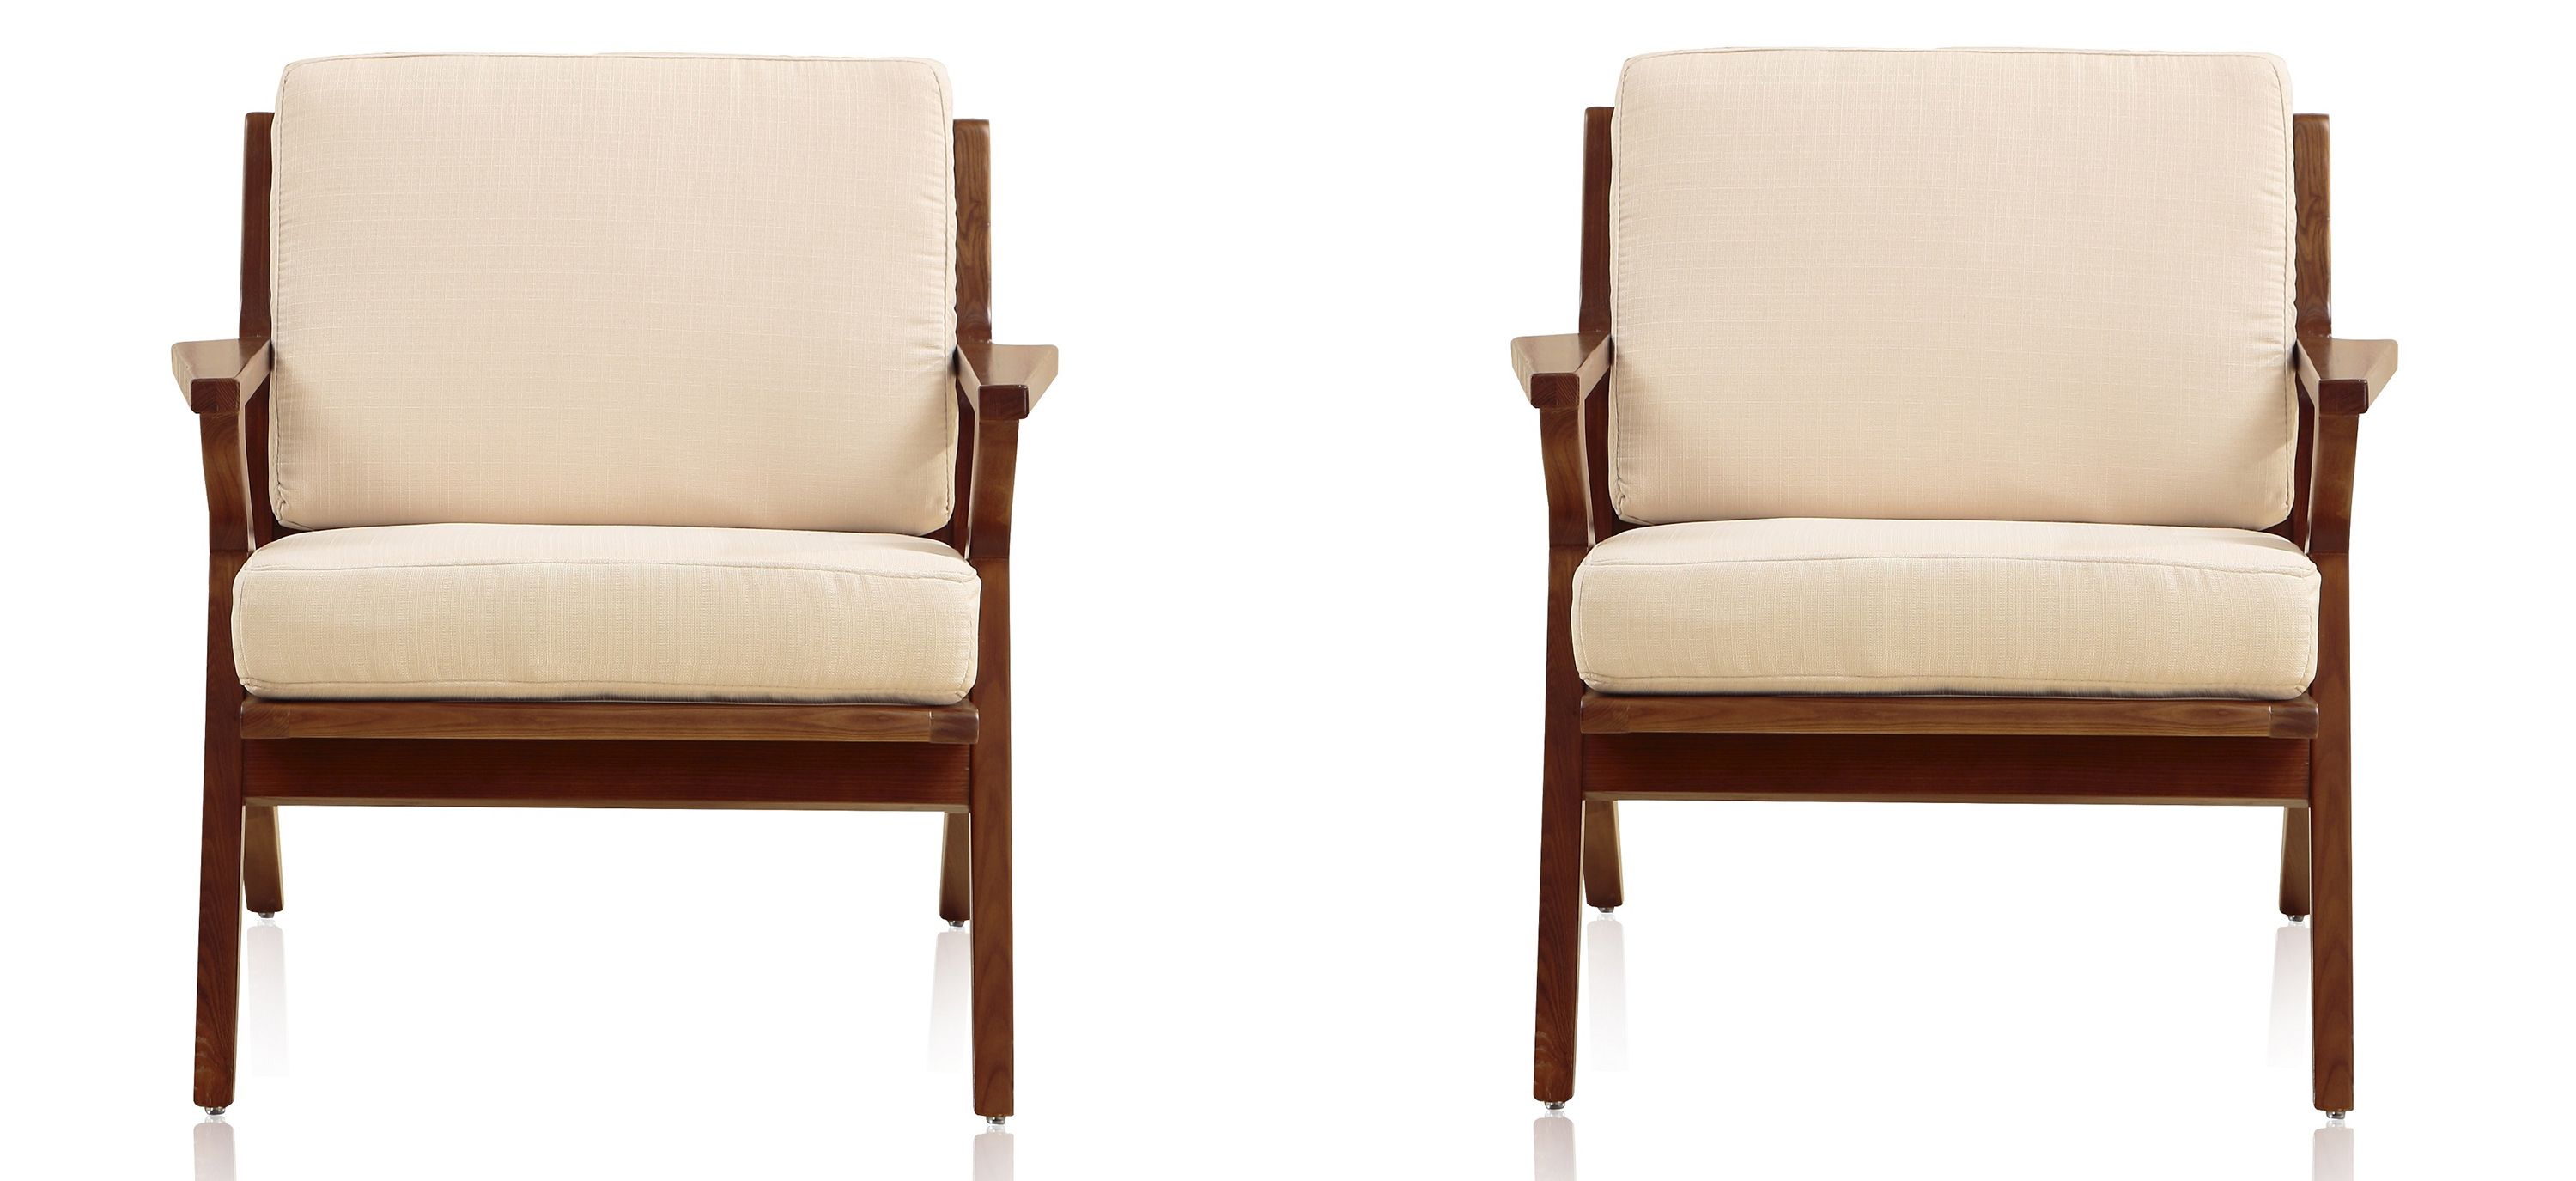 Martelle Chair (Set of 2)